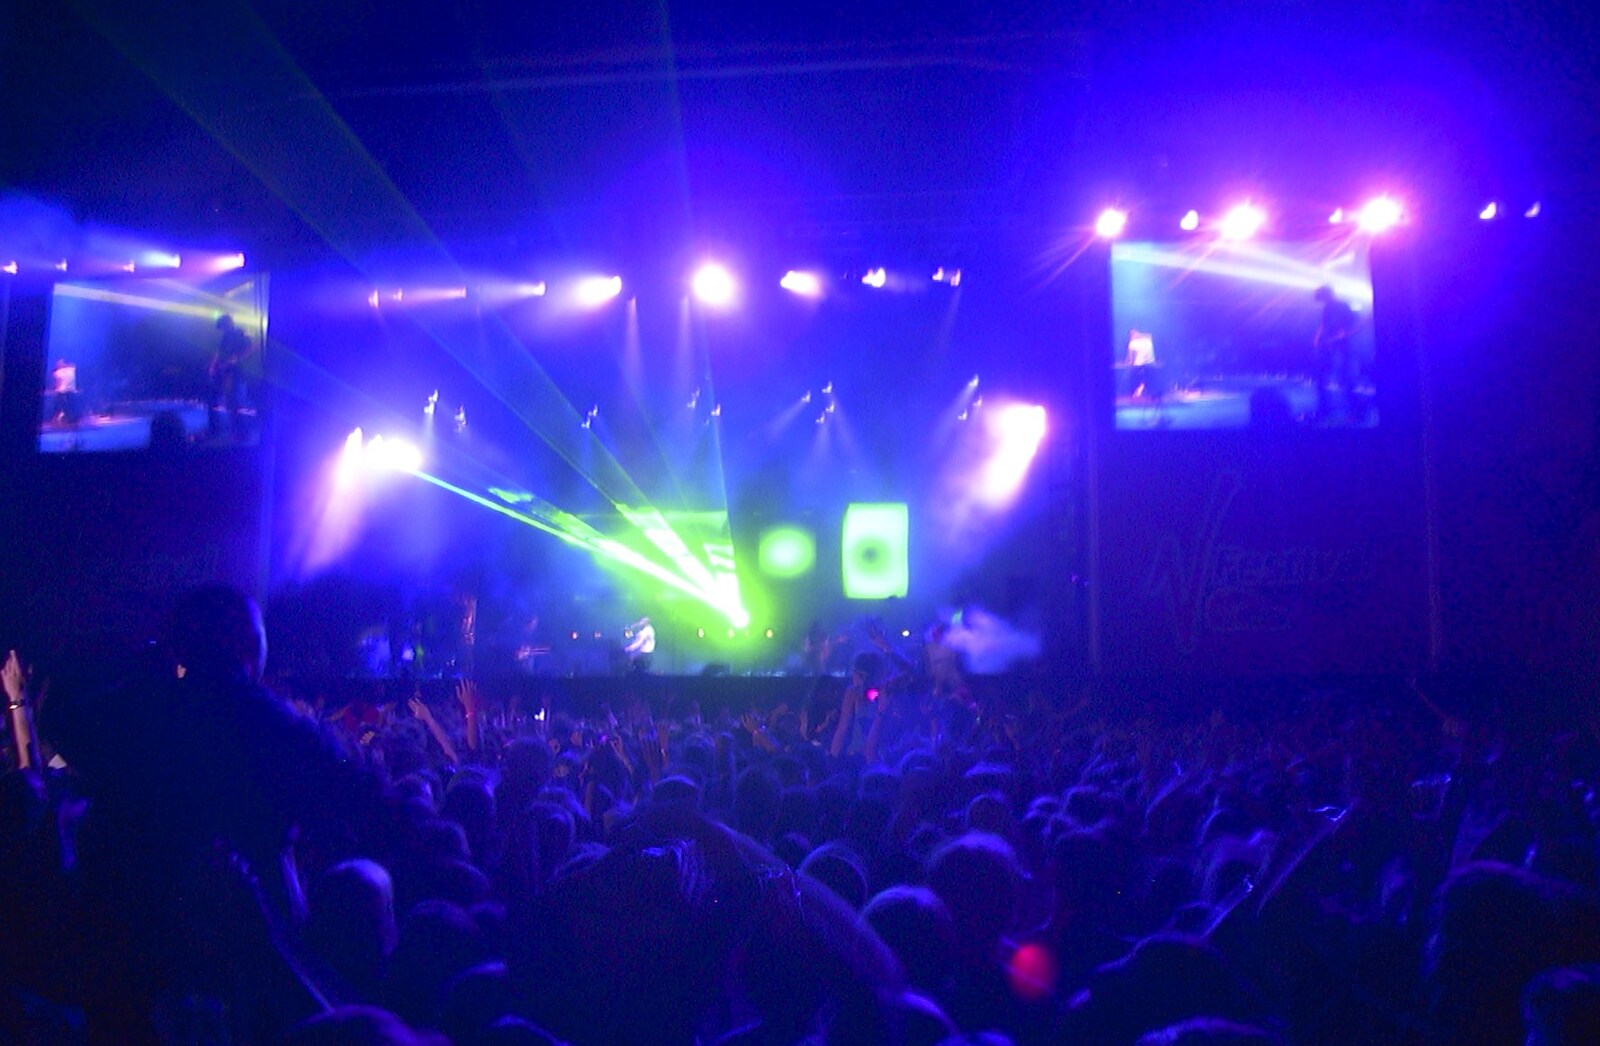 Coldplay are the final act, with lasers from V Festival 2003, Hyland's Park, Chelmsford, Essex - 16th August 2003